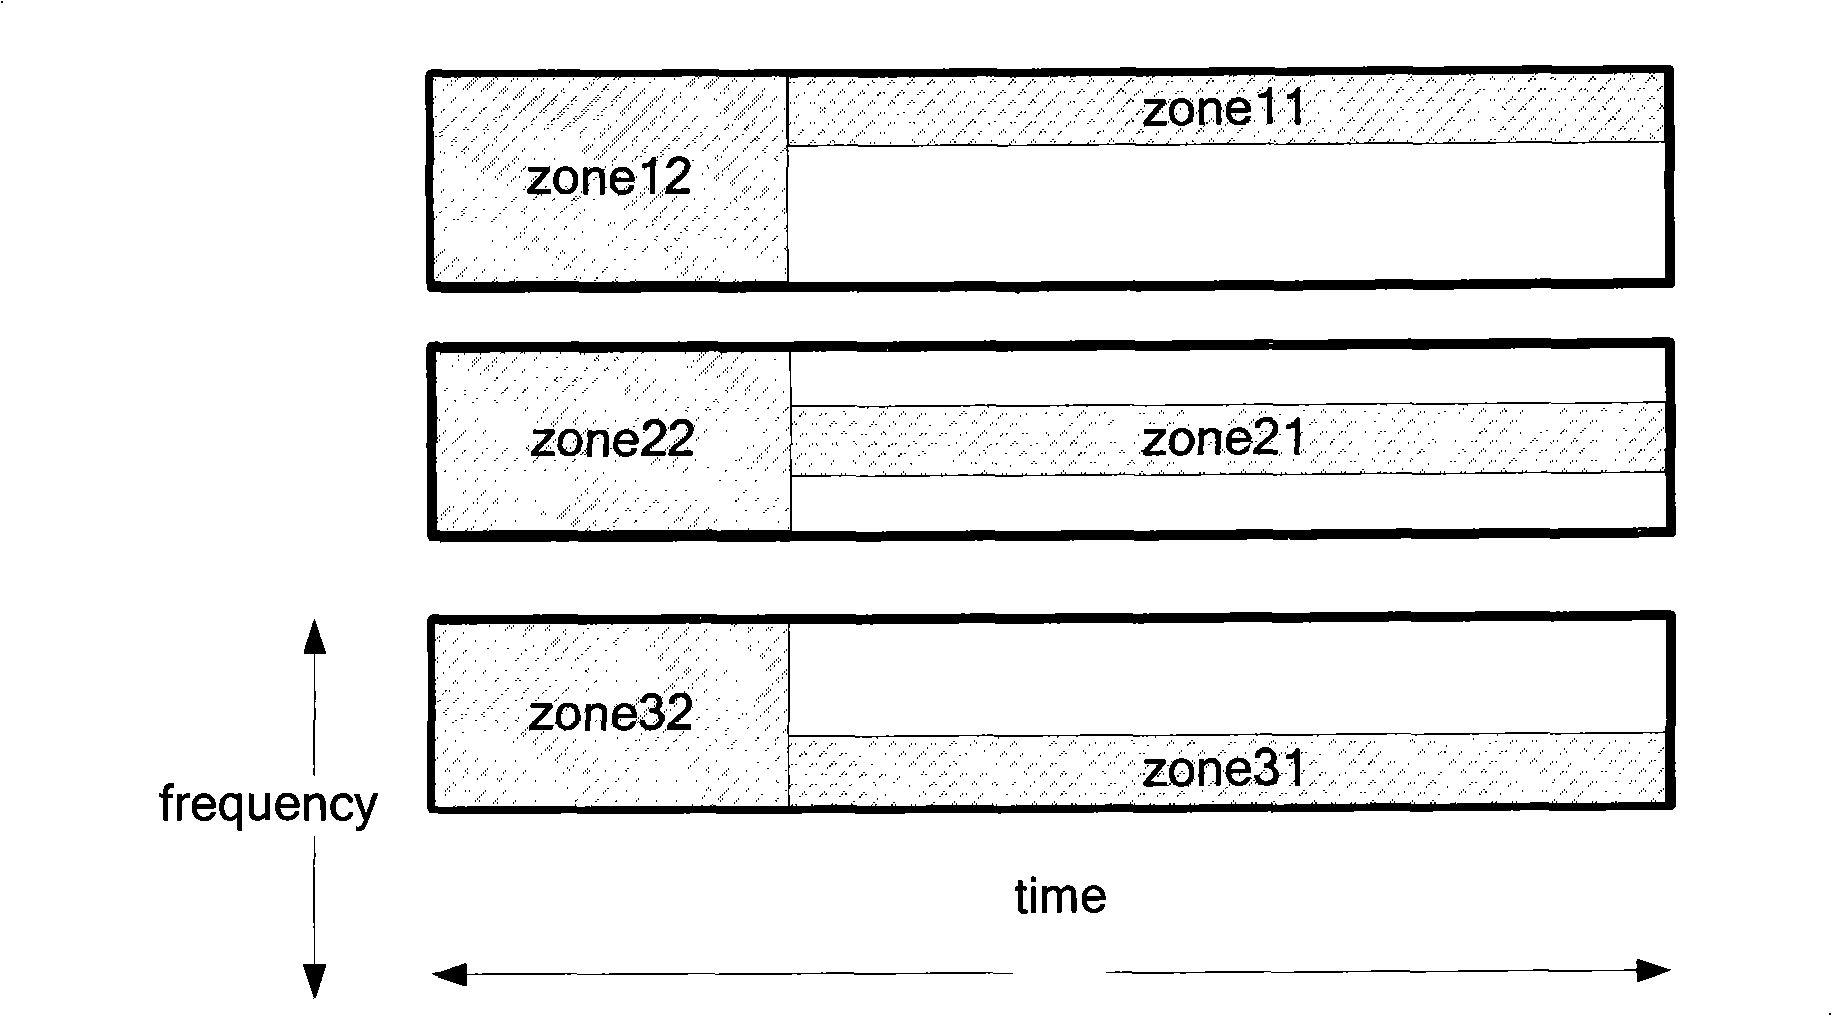 Method for inhibiting interference during identical networking by scheduling